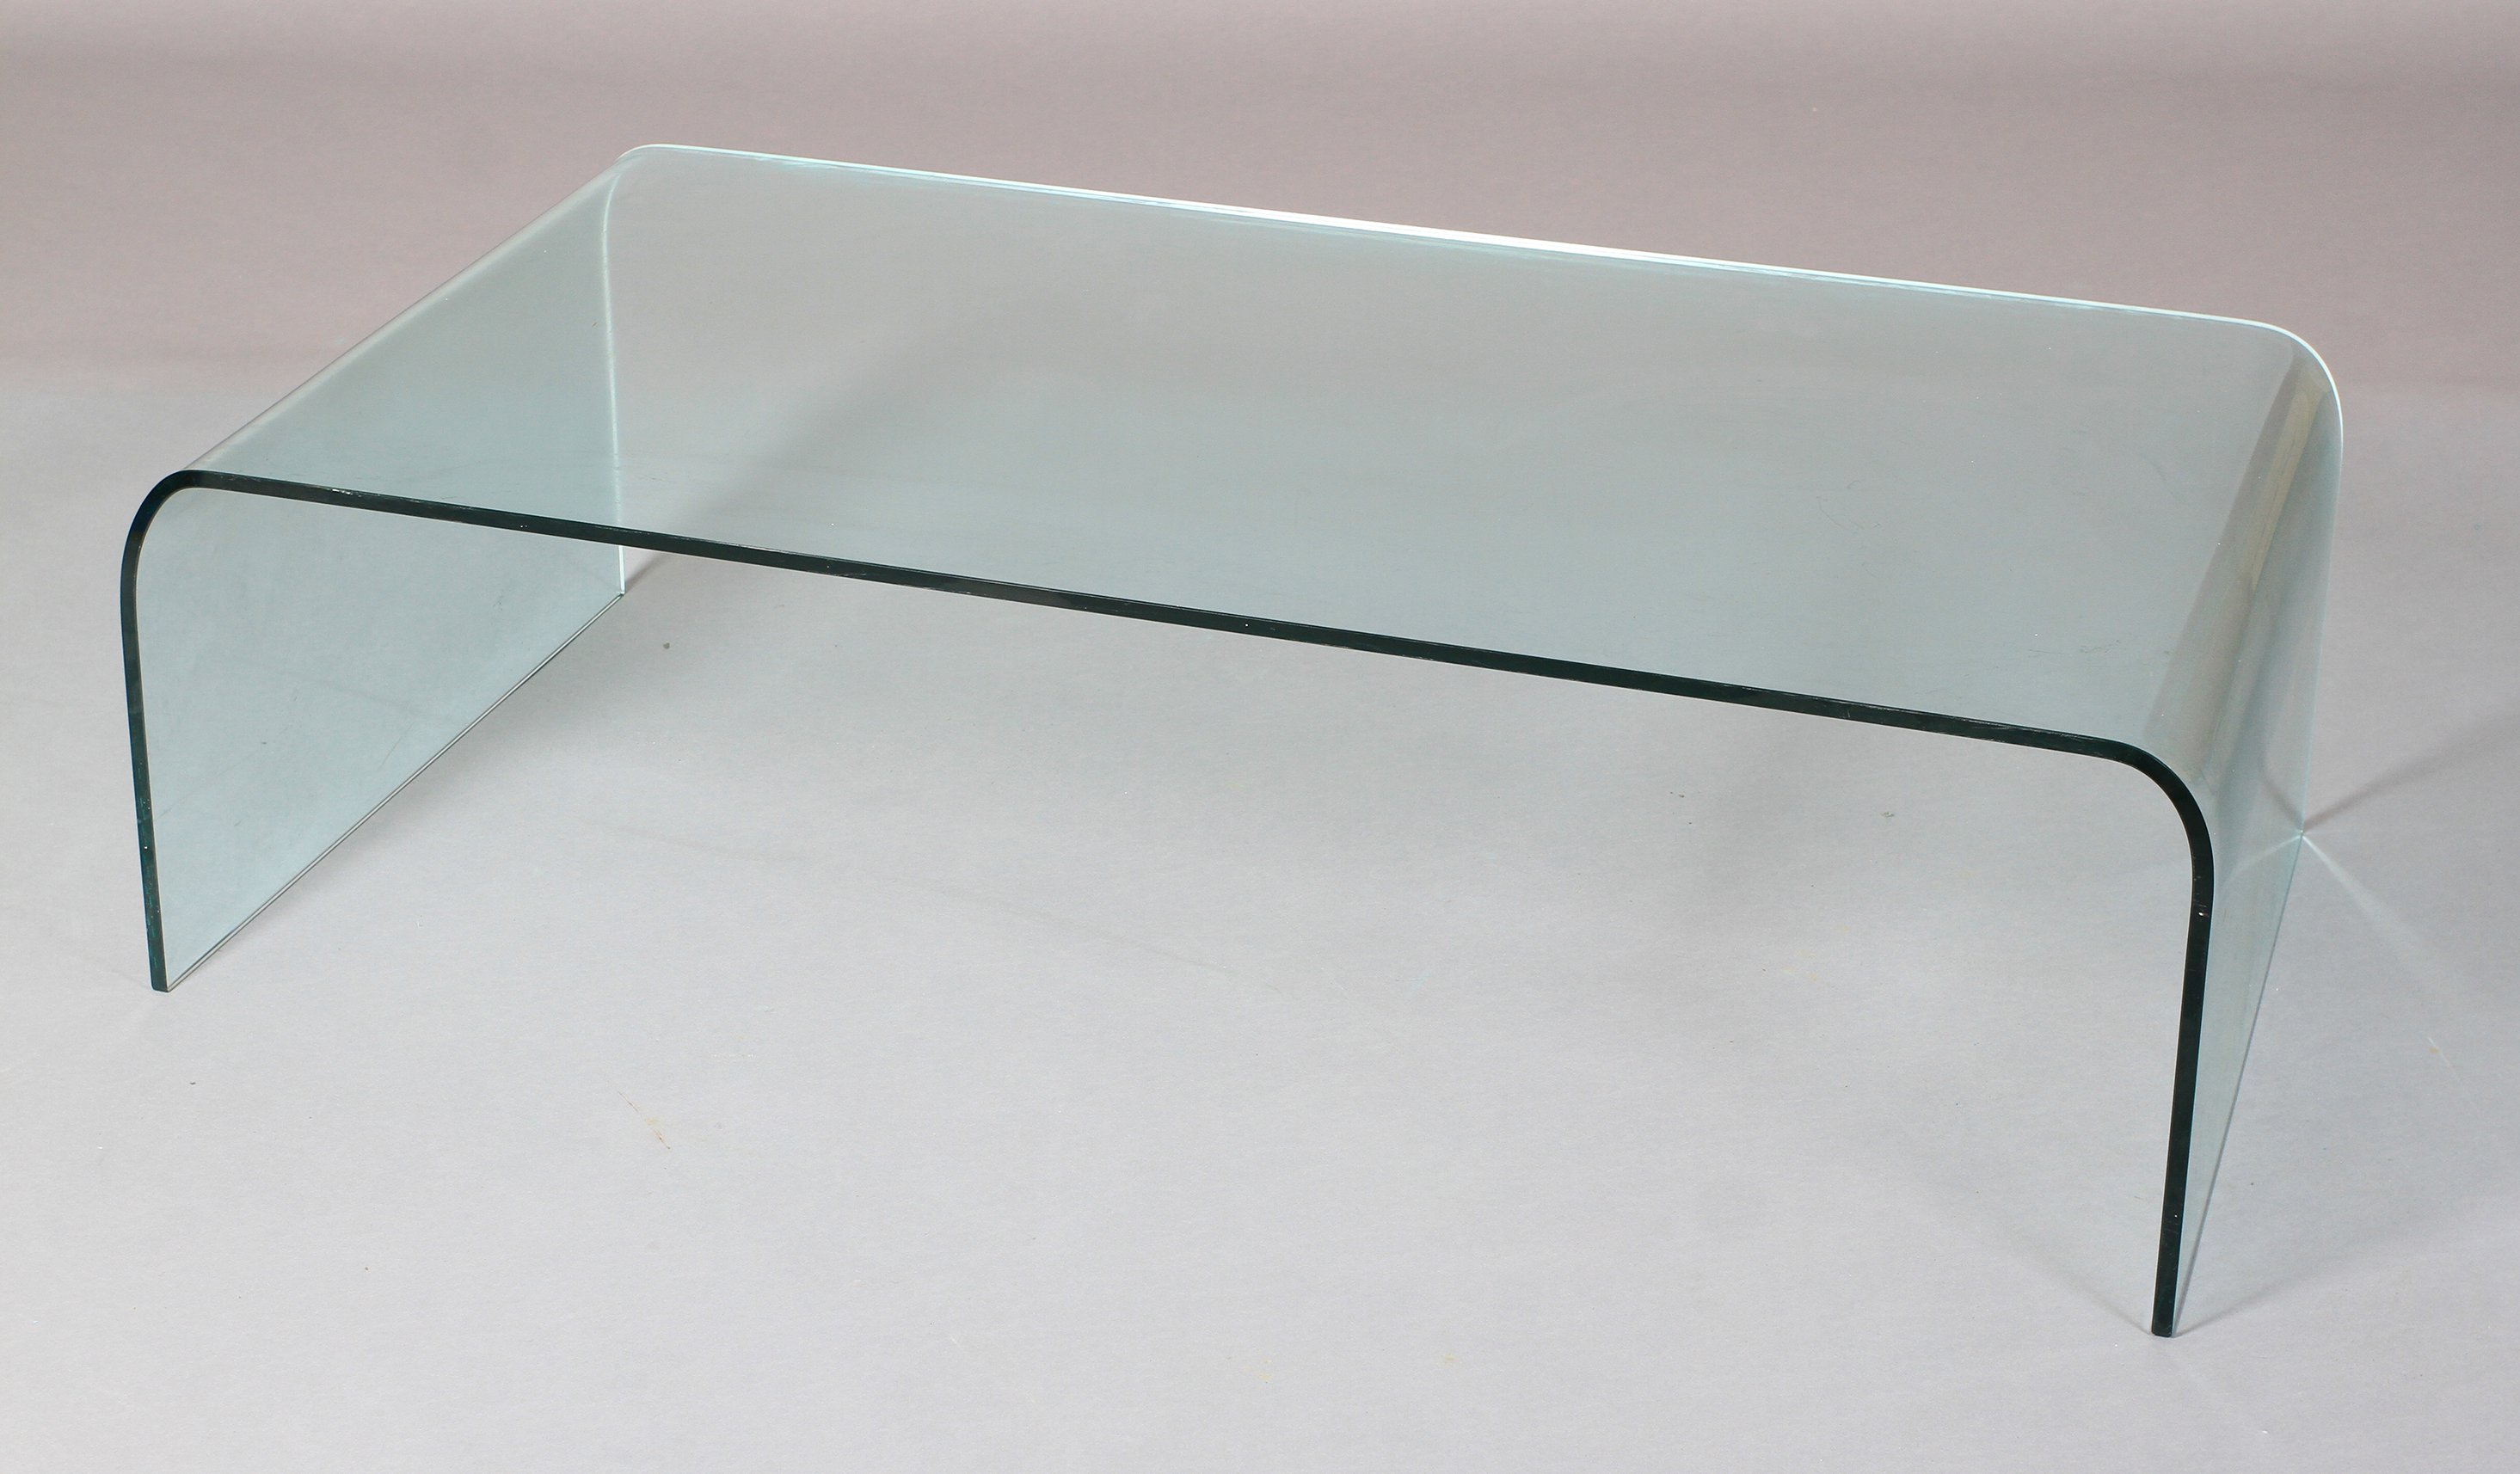 A curved glass coffee table 130cm long x 69cm wide x 38cm high